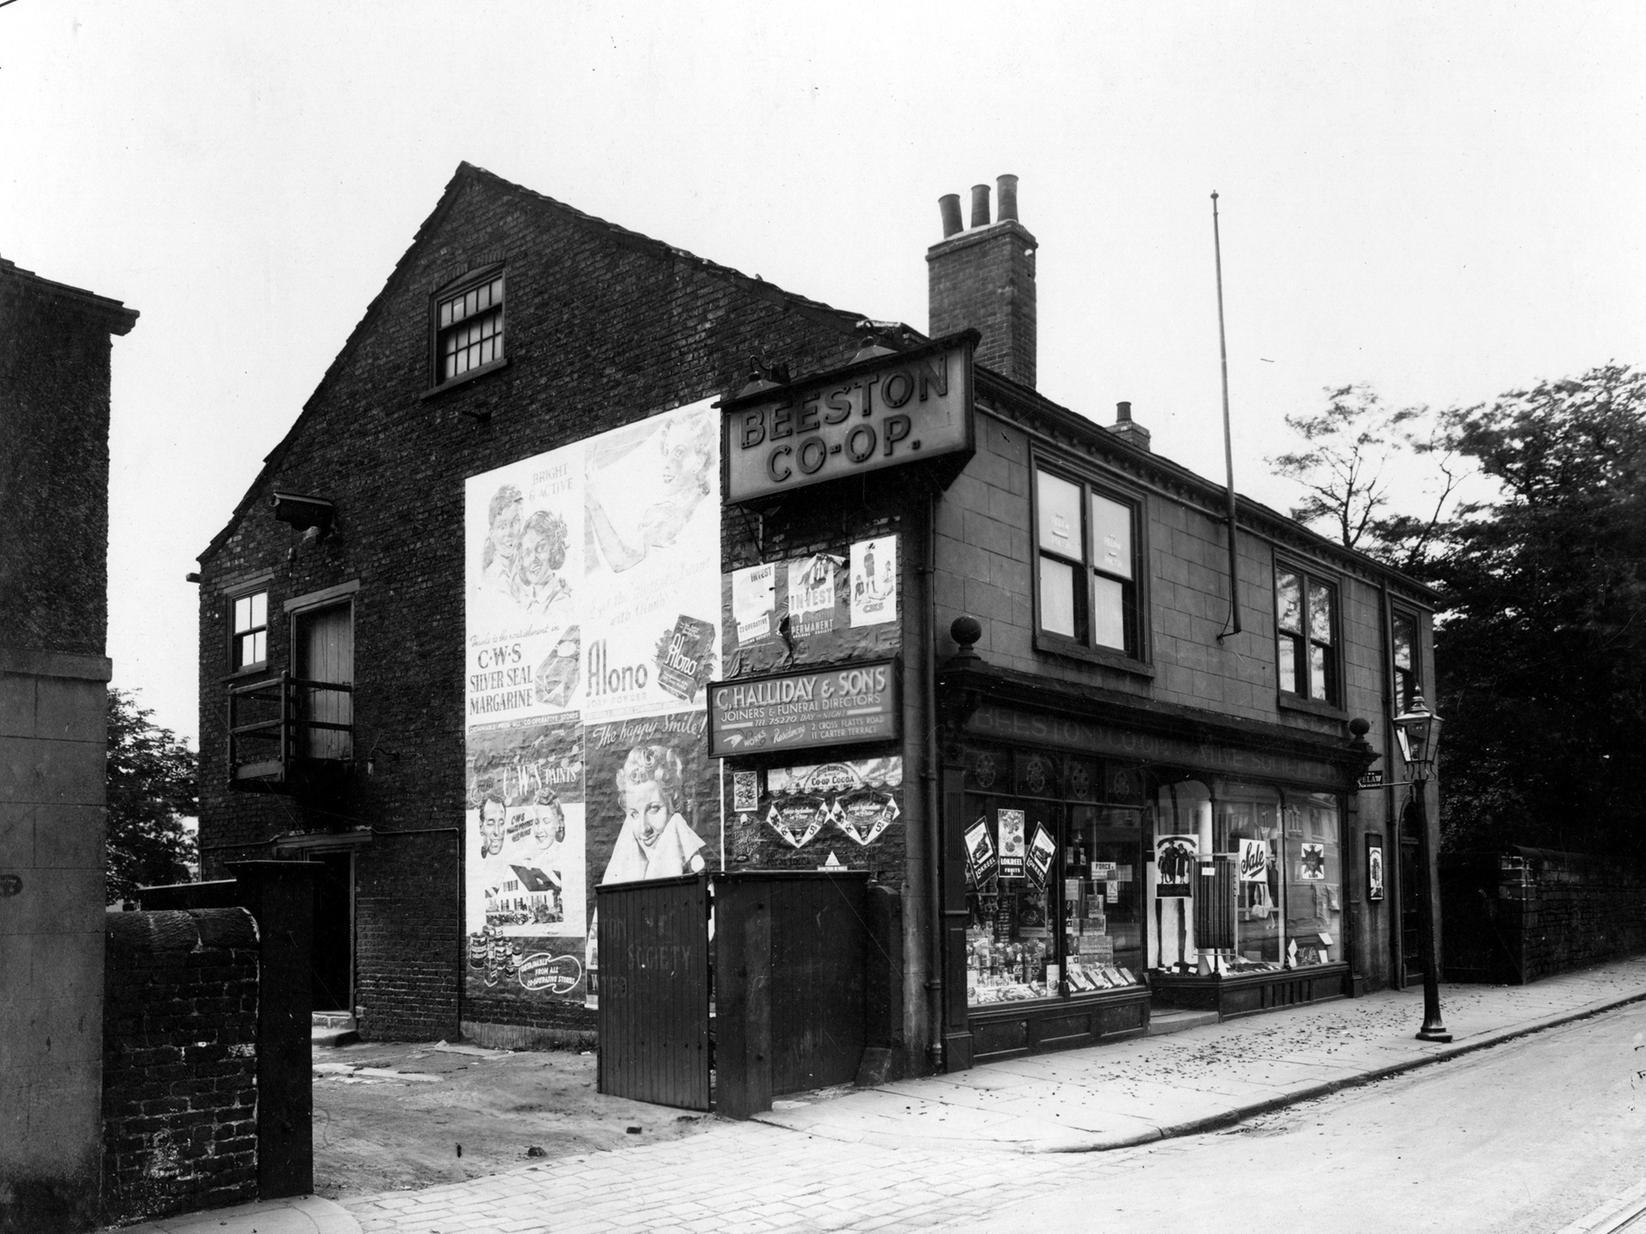 A view of Beeston Co-operative Society which was at 79 Town Street. The entrance to yard of C.Halliday & Sons, Joiners and Funeral Directors can be seen on the left.